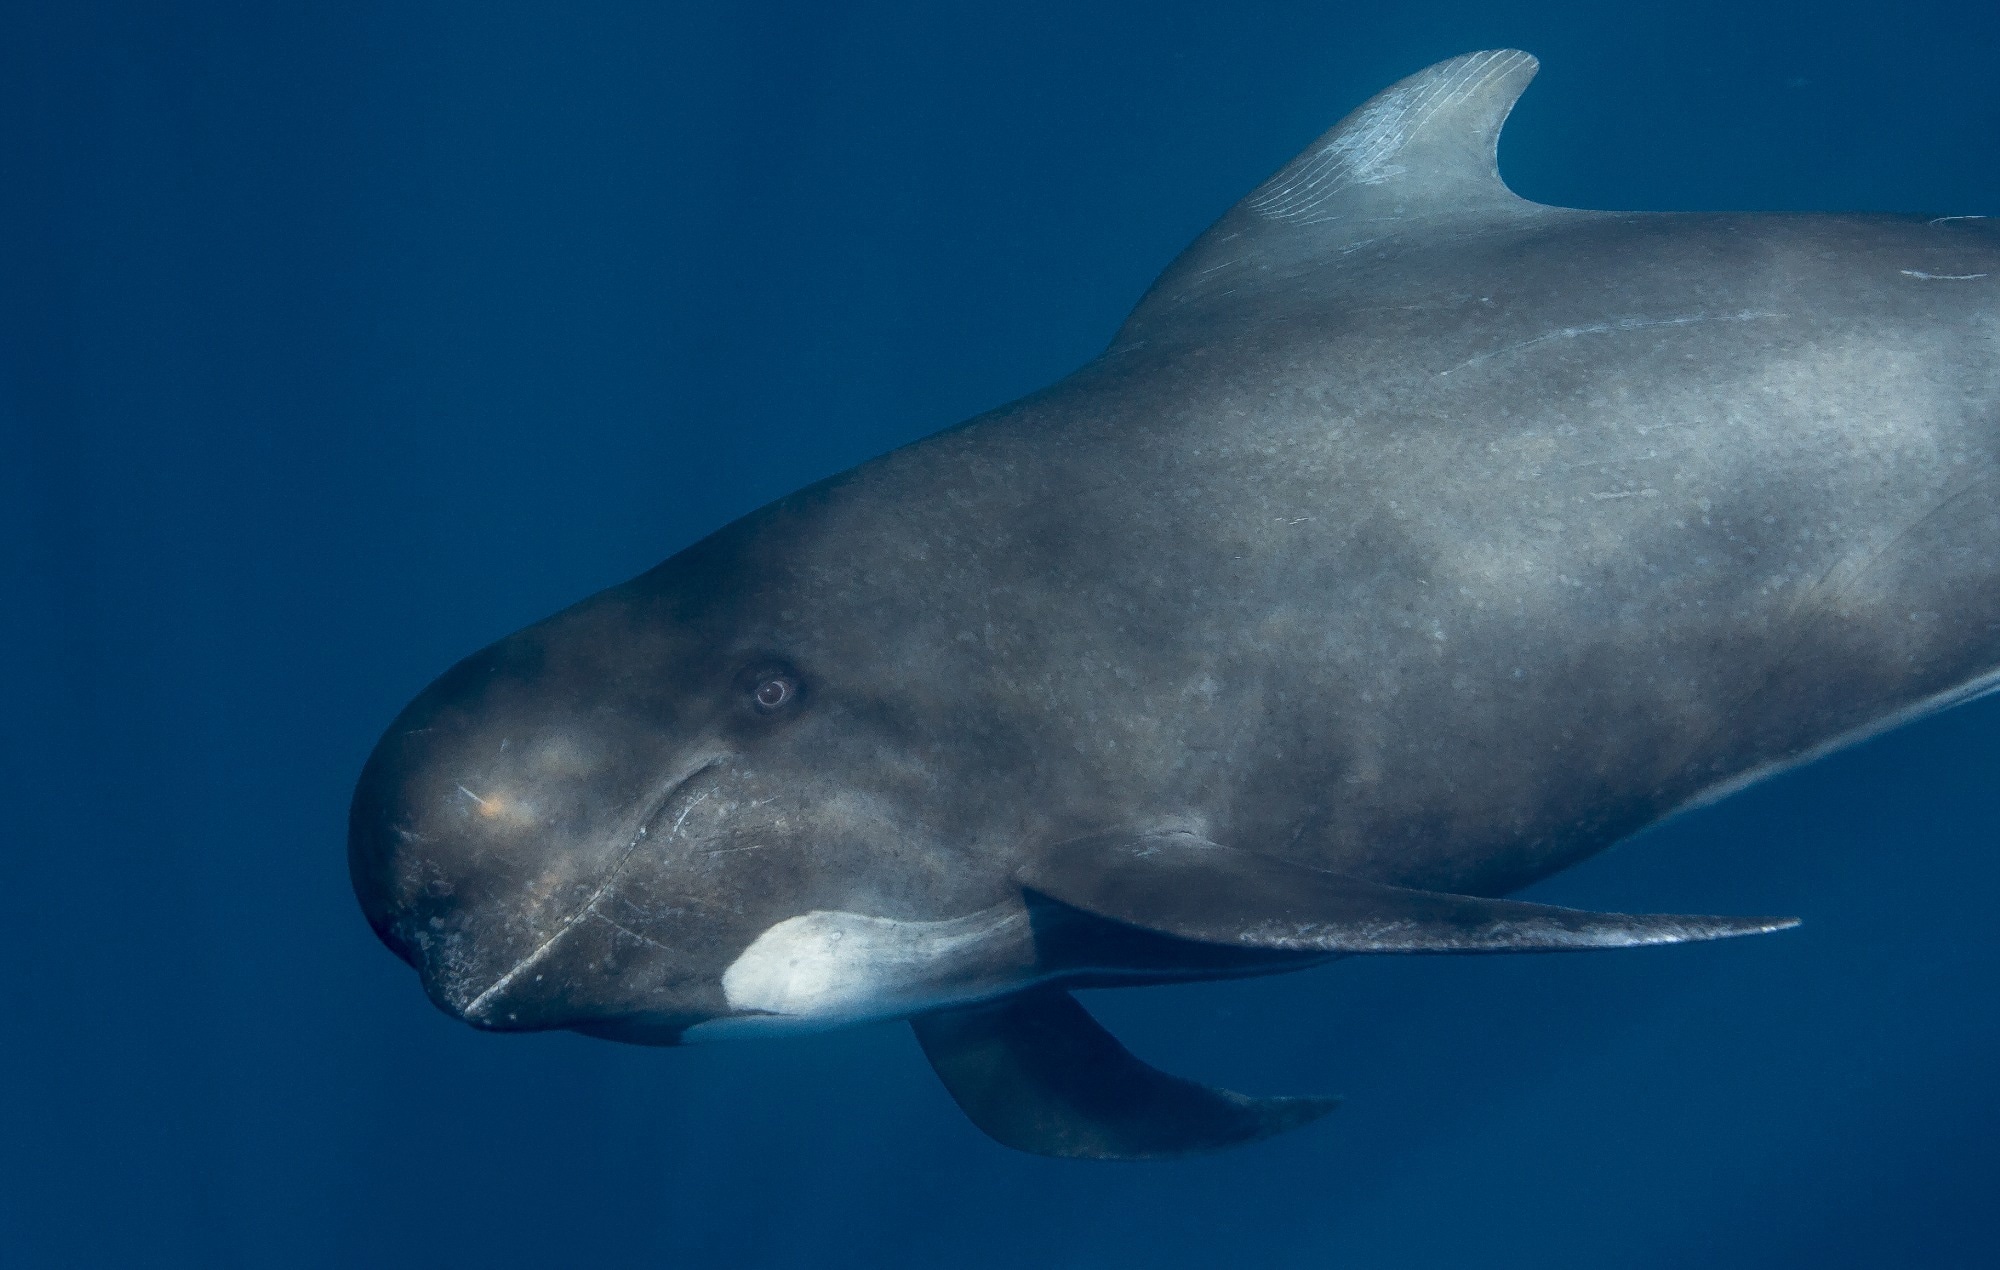 Study: Alzheimer’s disease-like neuropathology in three species of oceanic dolphin. Image Credit: Andrew Sutton / Shutterstock